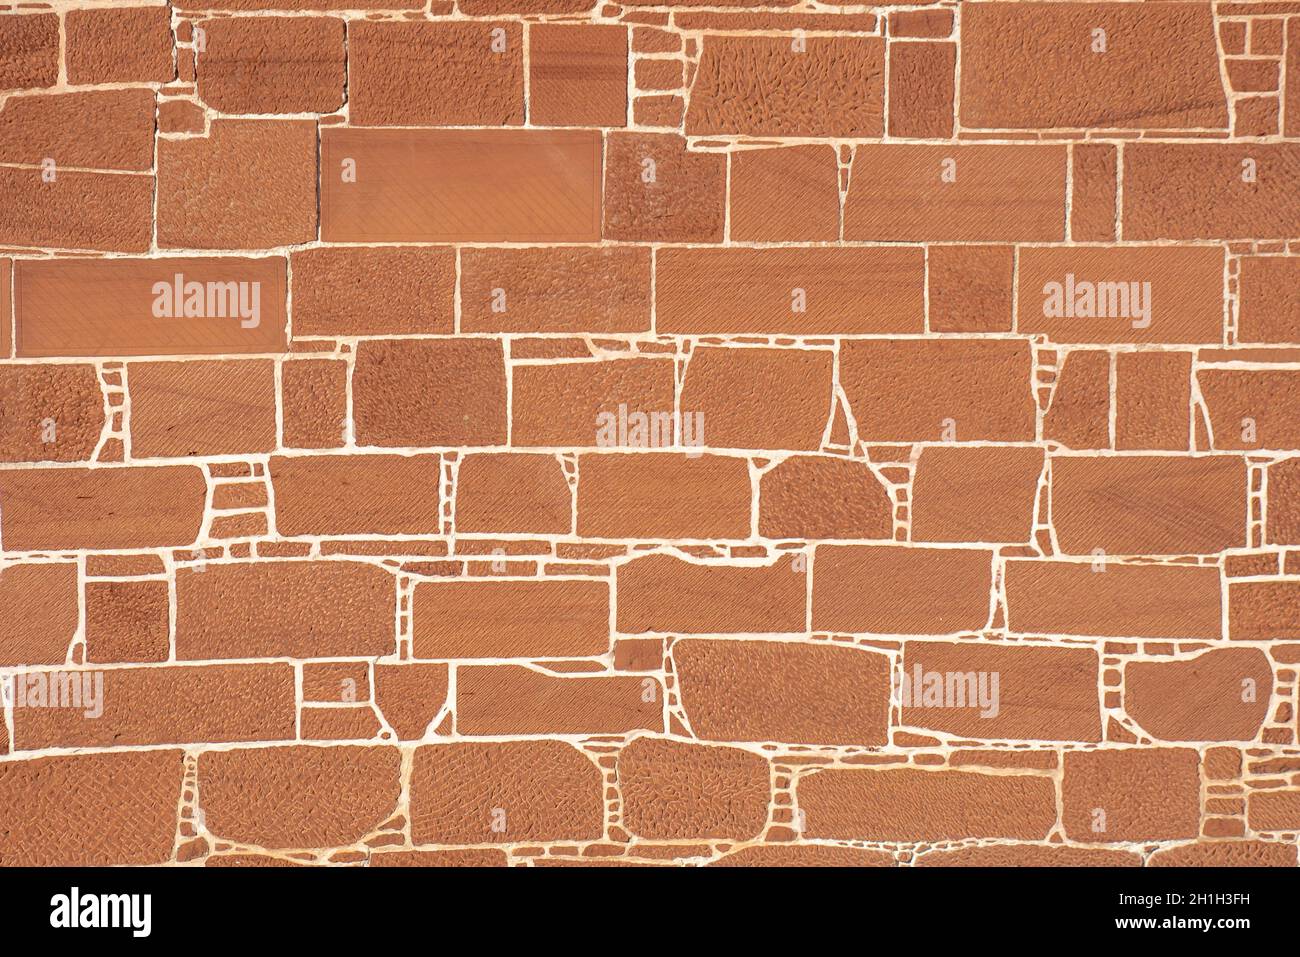 Red stone wall, walls, constructed, farmers, primitive people, dry stone wall, mortar, plaster, city walls, castles, fortifications, patterns, unique. Stock Photo